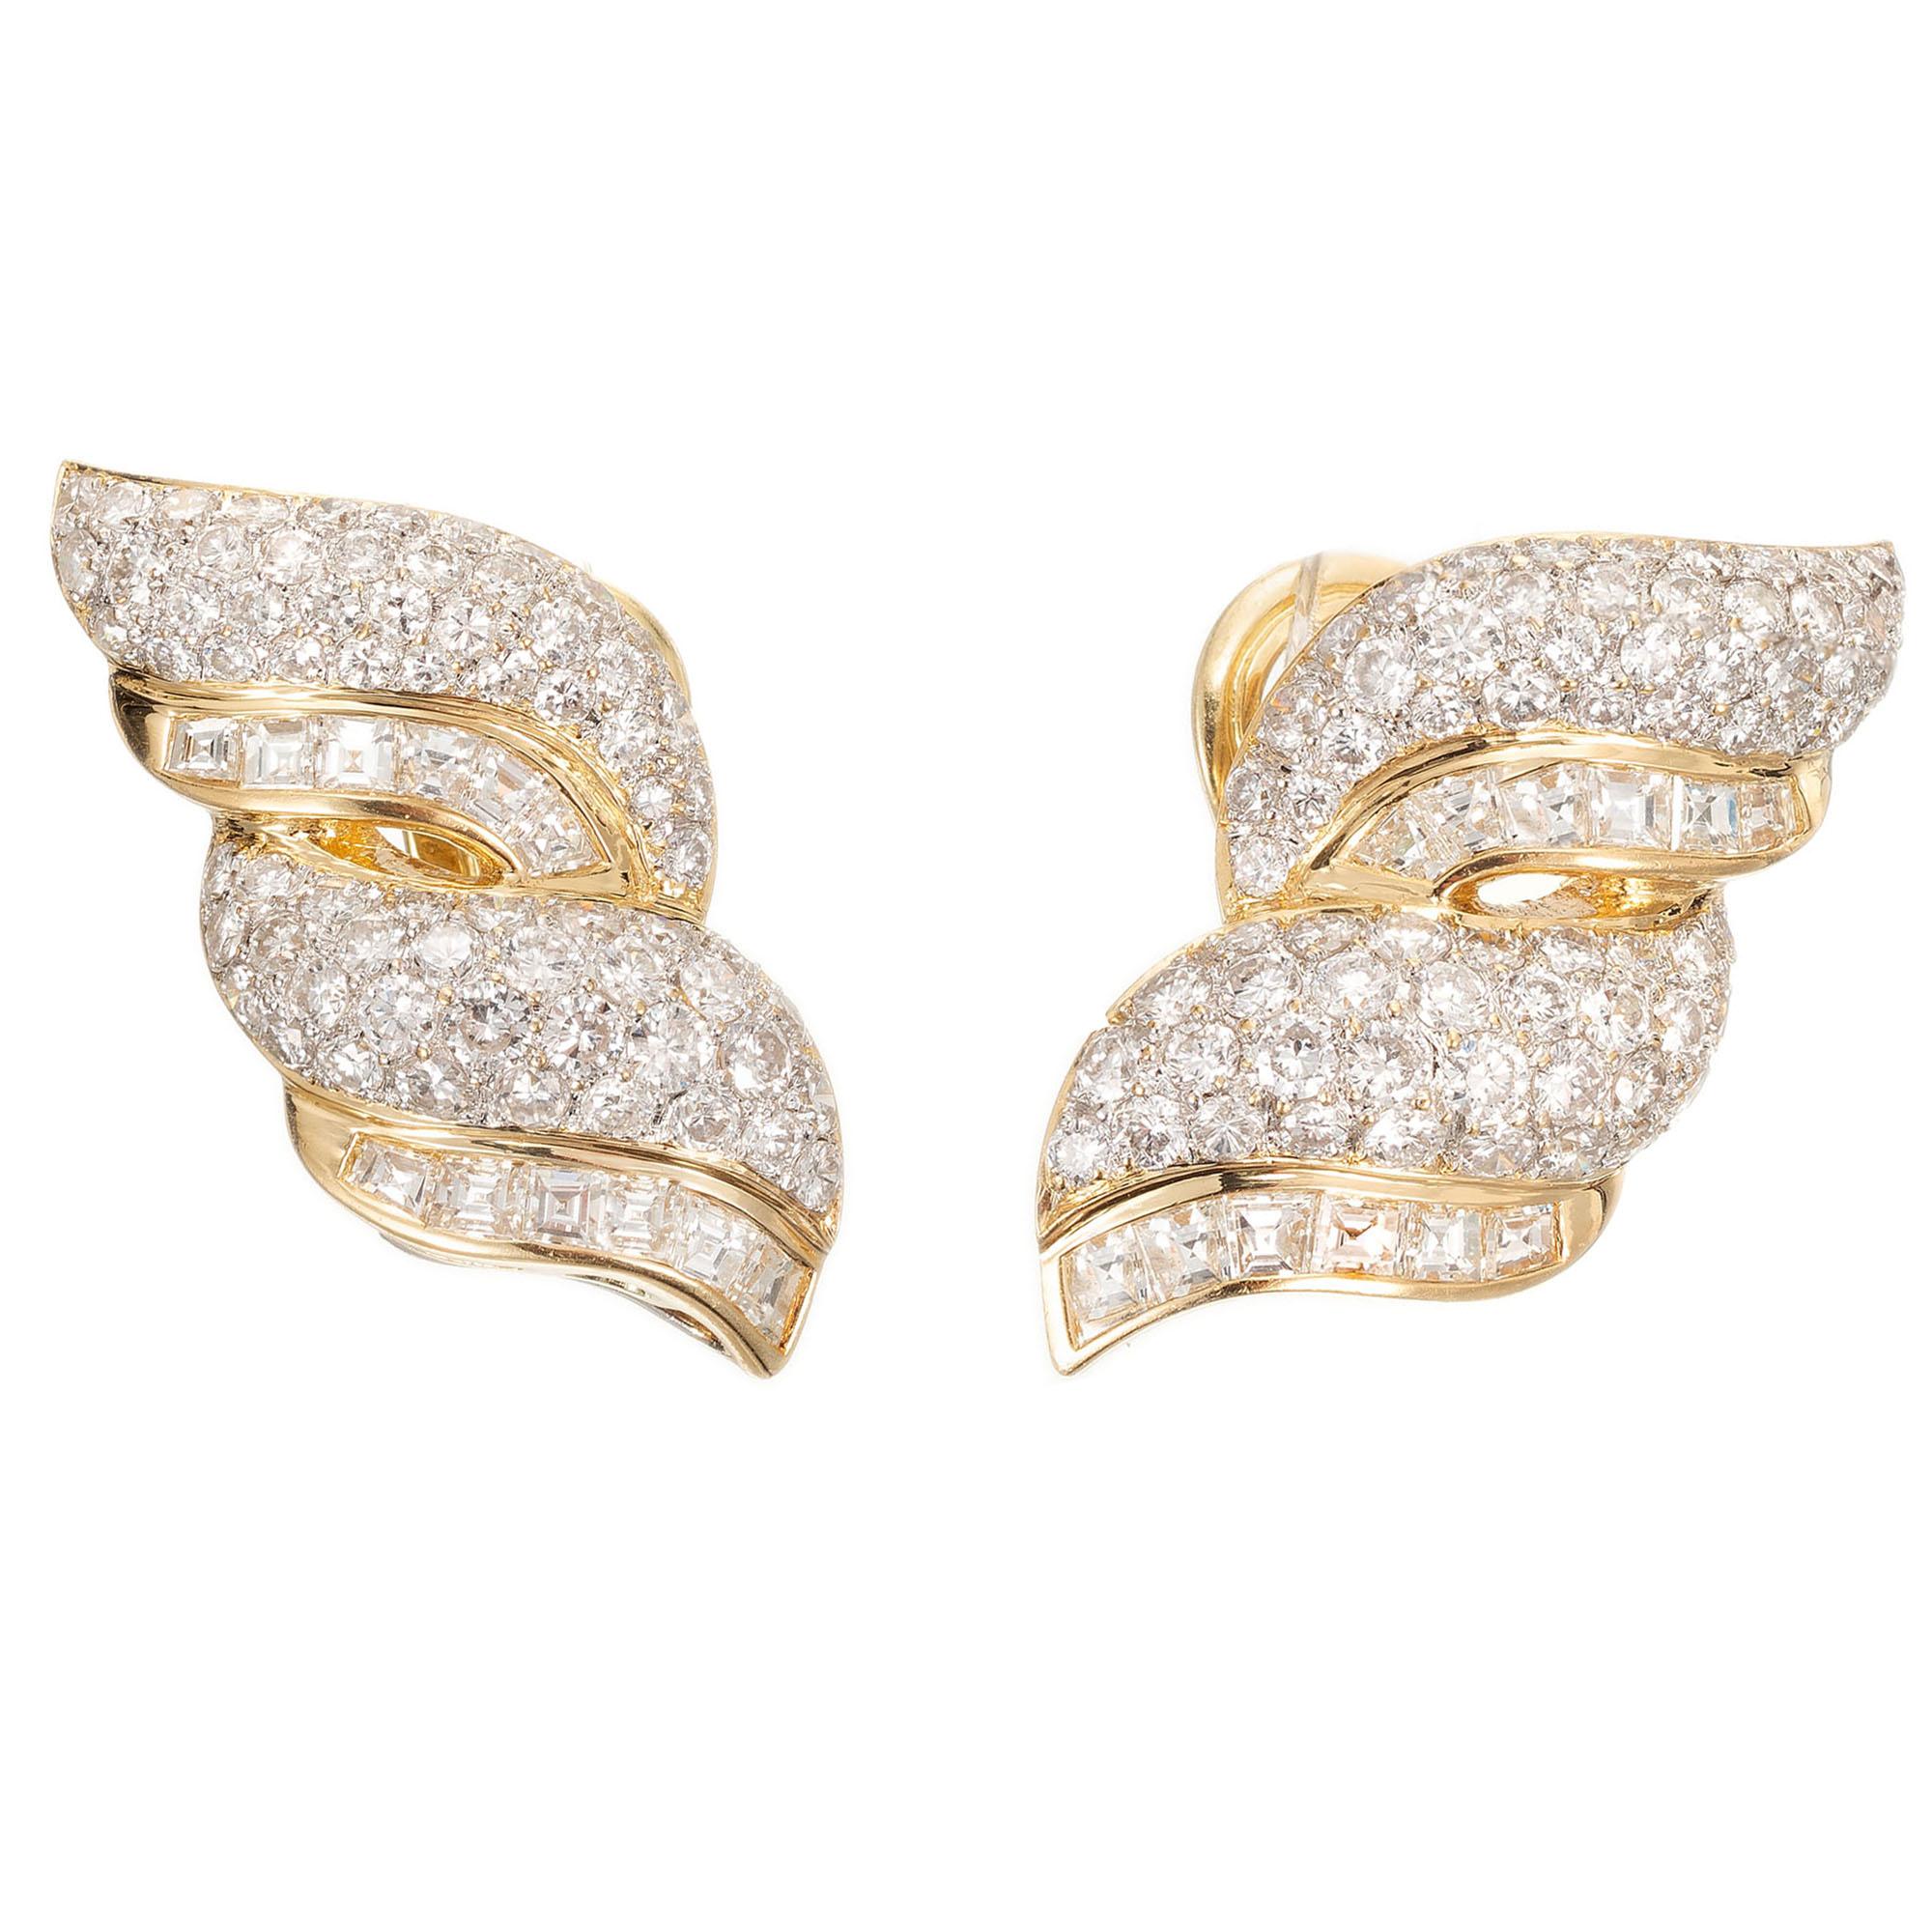 Swirl design diamond earrings. set with 138 round brilliant cut diamonds and 24 square step cut diamonds in a 18 karat gold clip post earrings with a wire loop at the bottom to hold a dangle.

138 round brilliant cut diamonds, G VS approx. 4.30cts